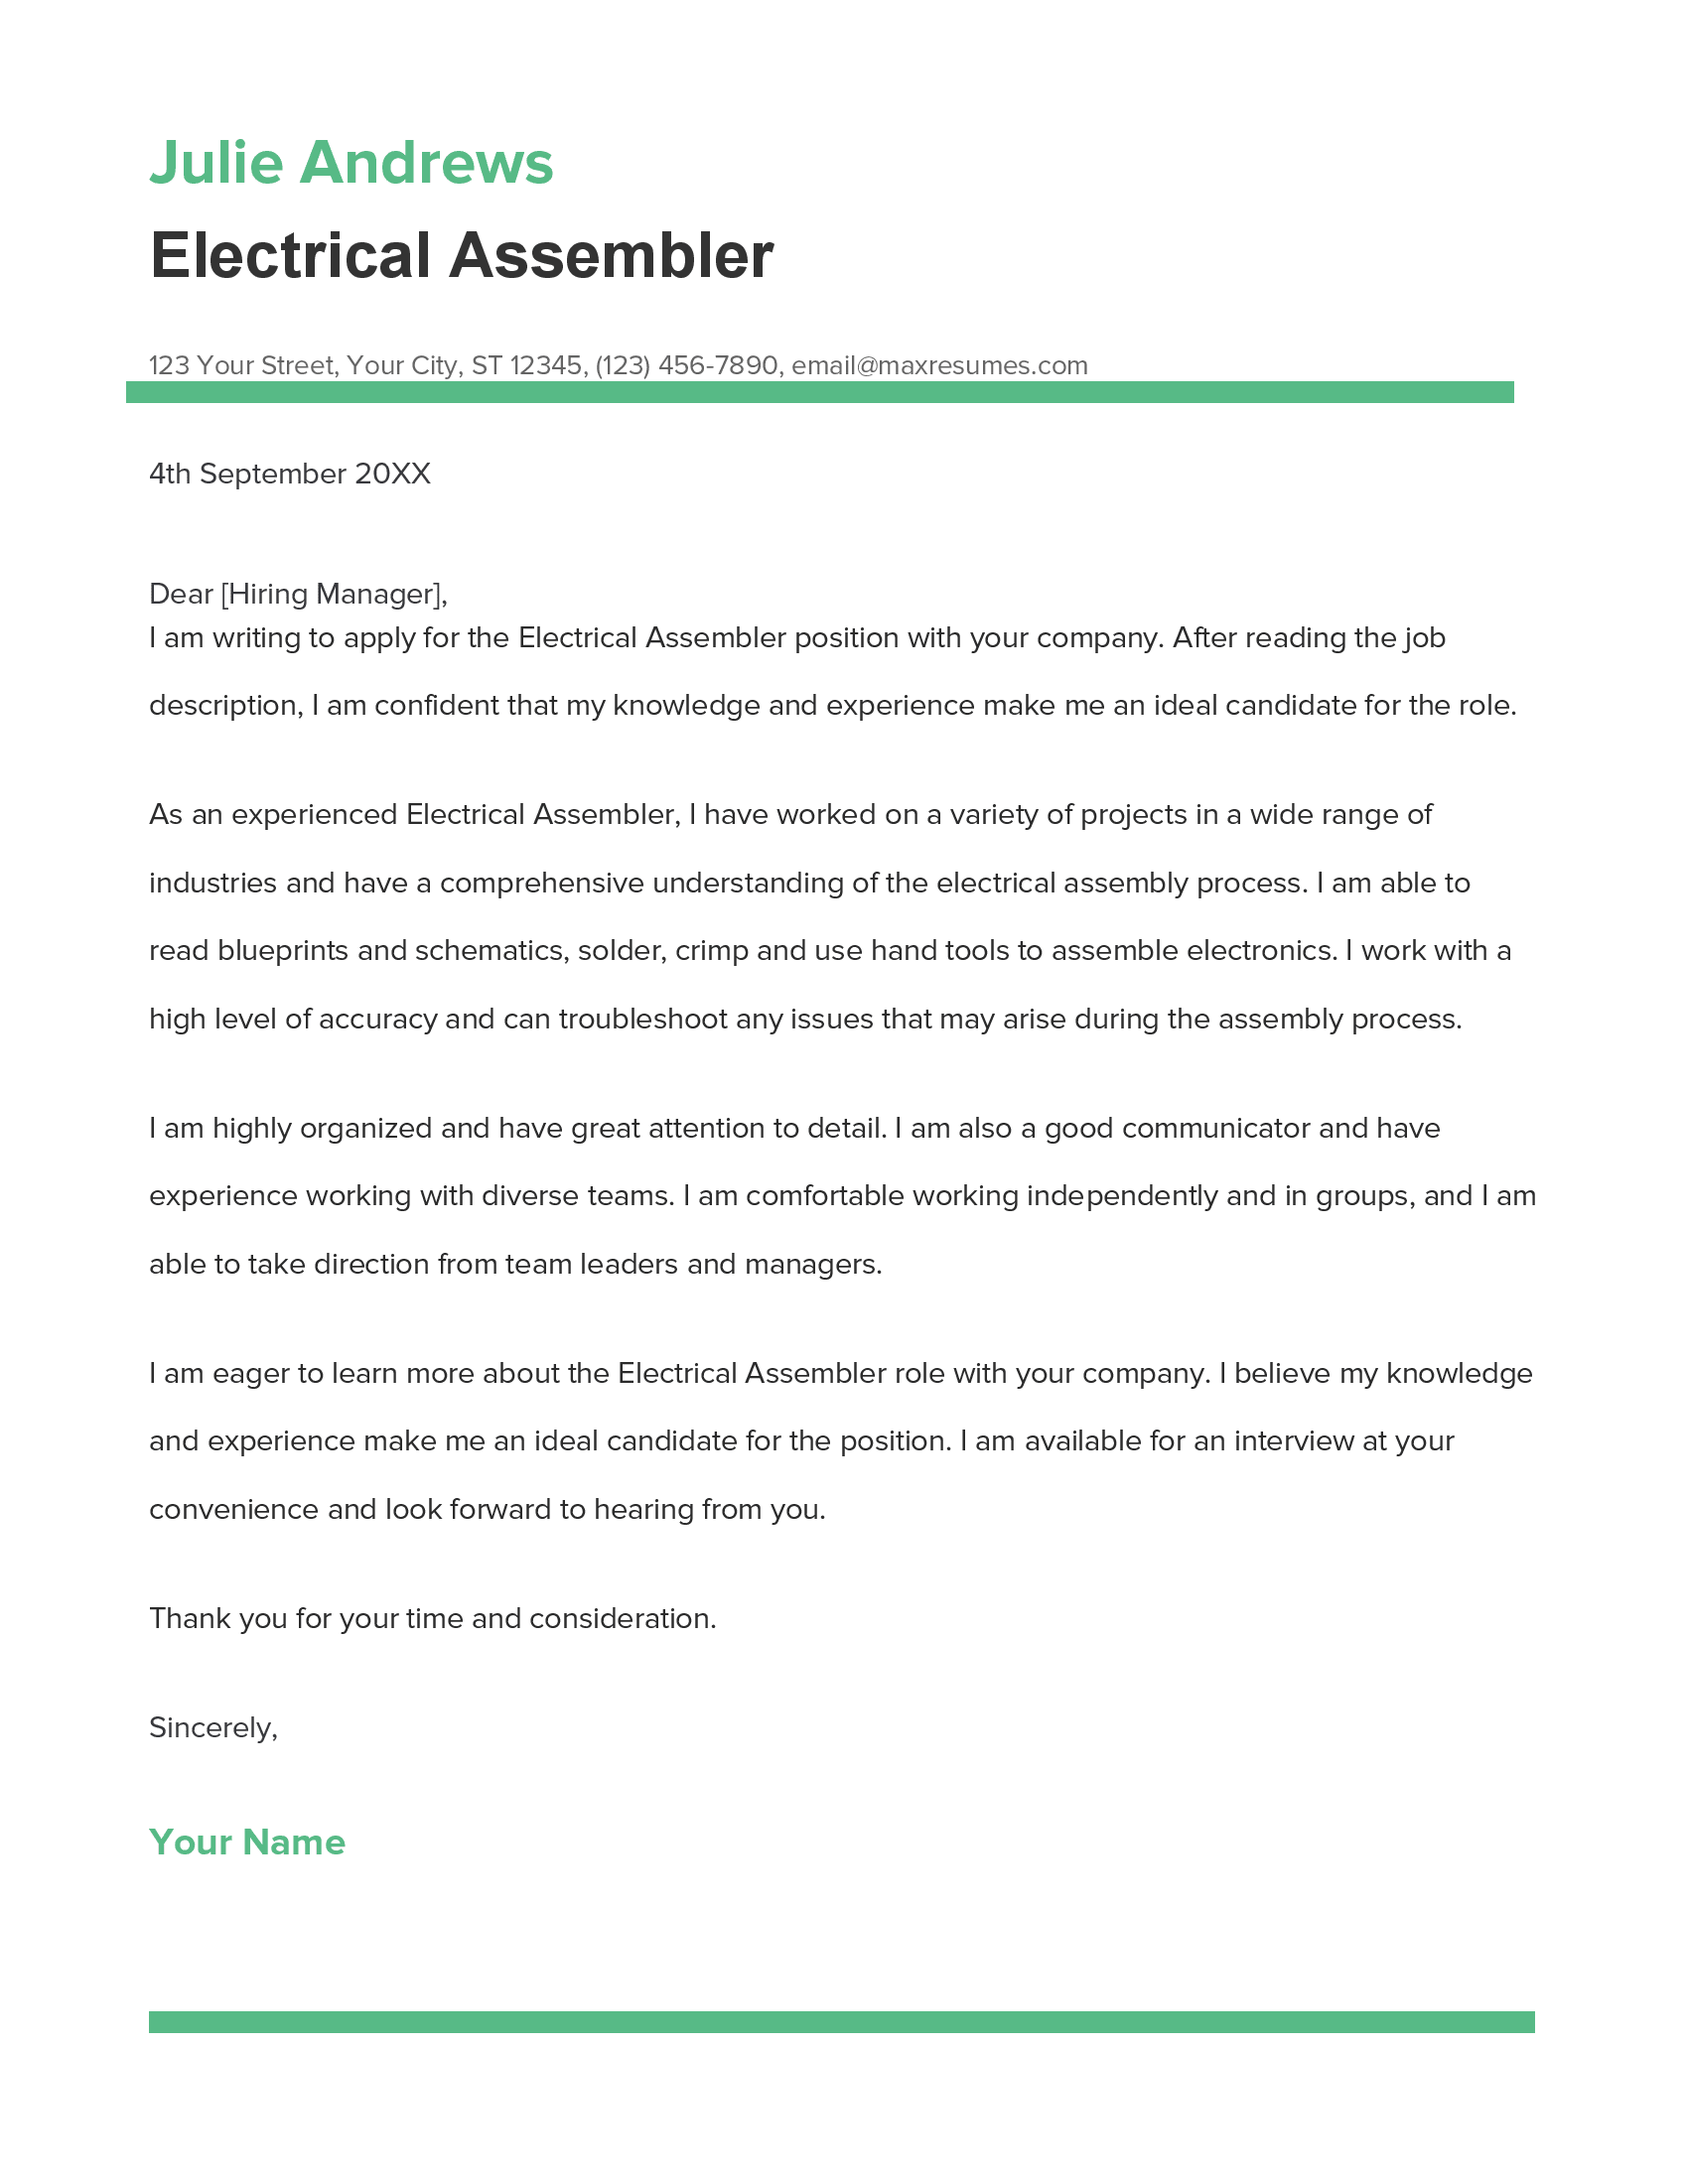 Electrical Assembler Cover Letter Example